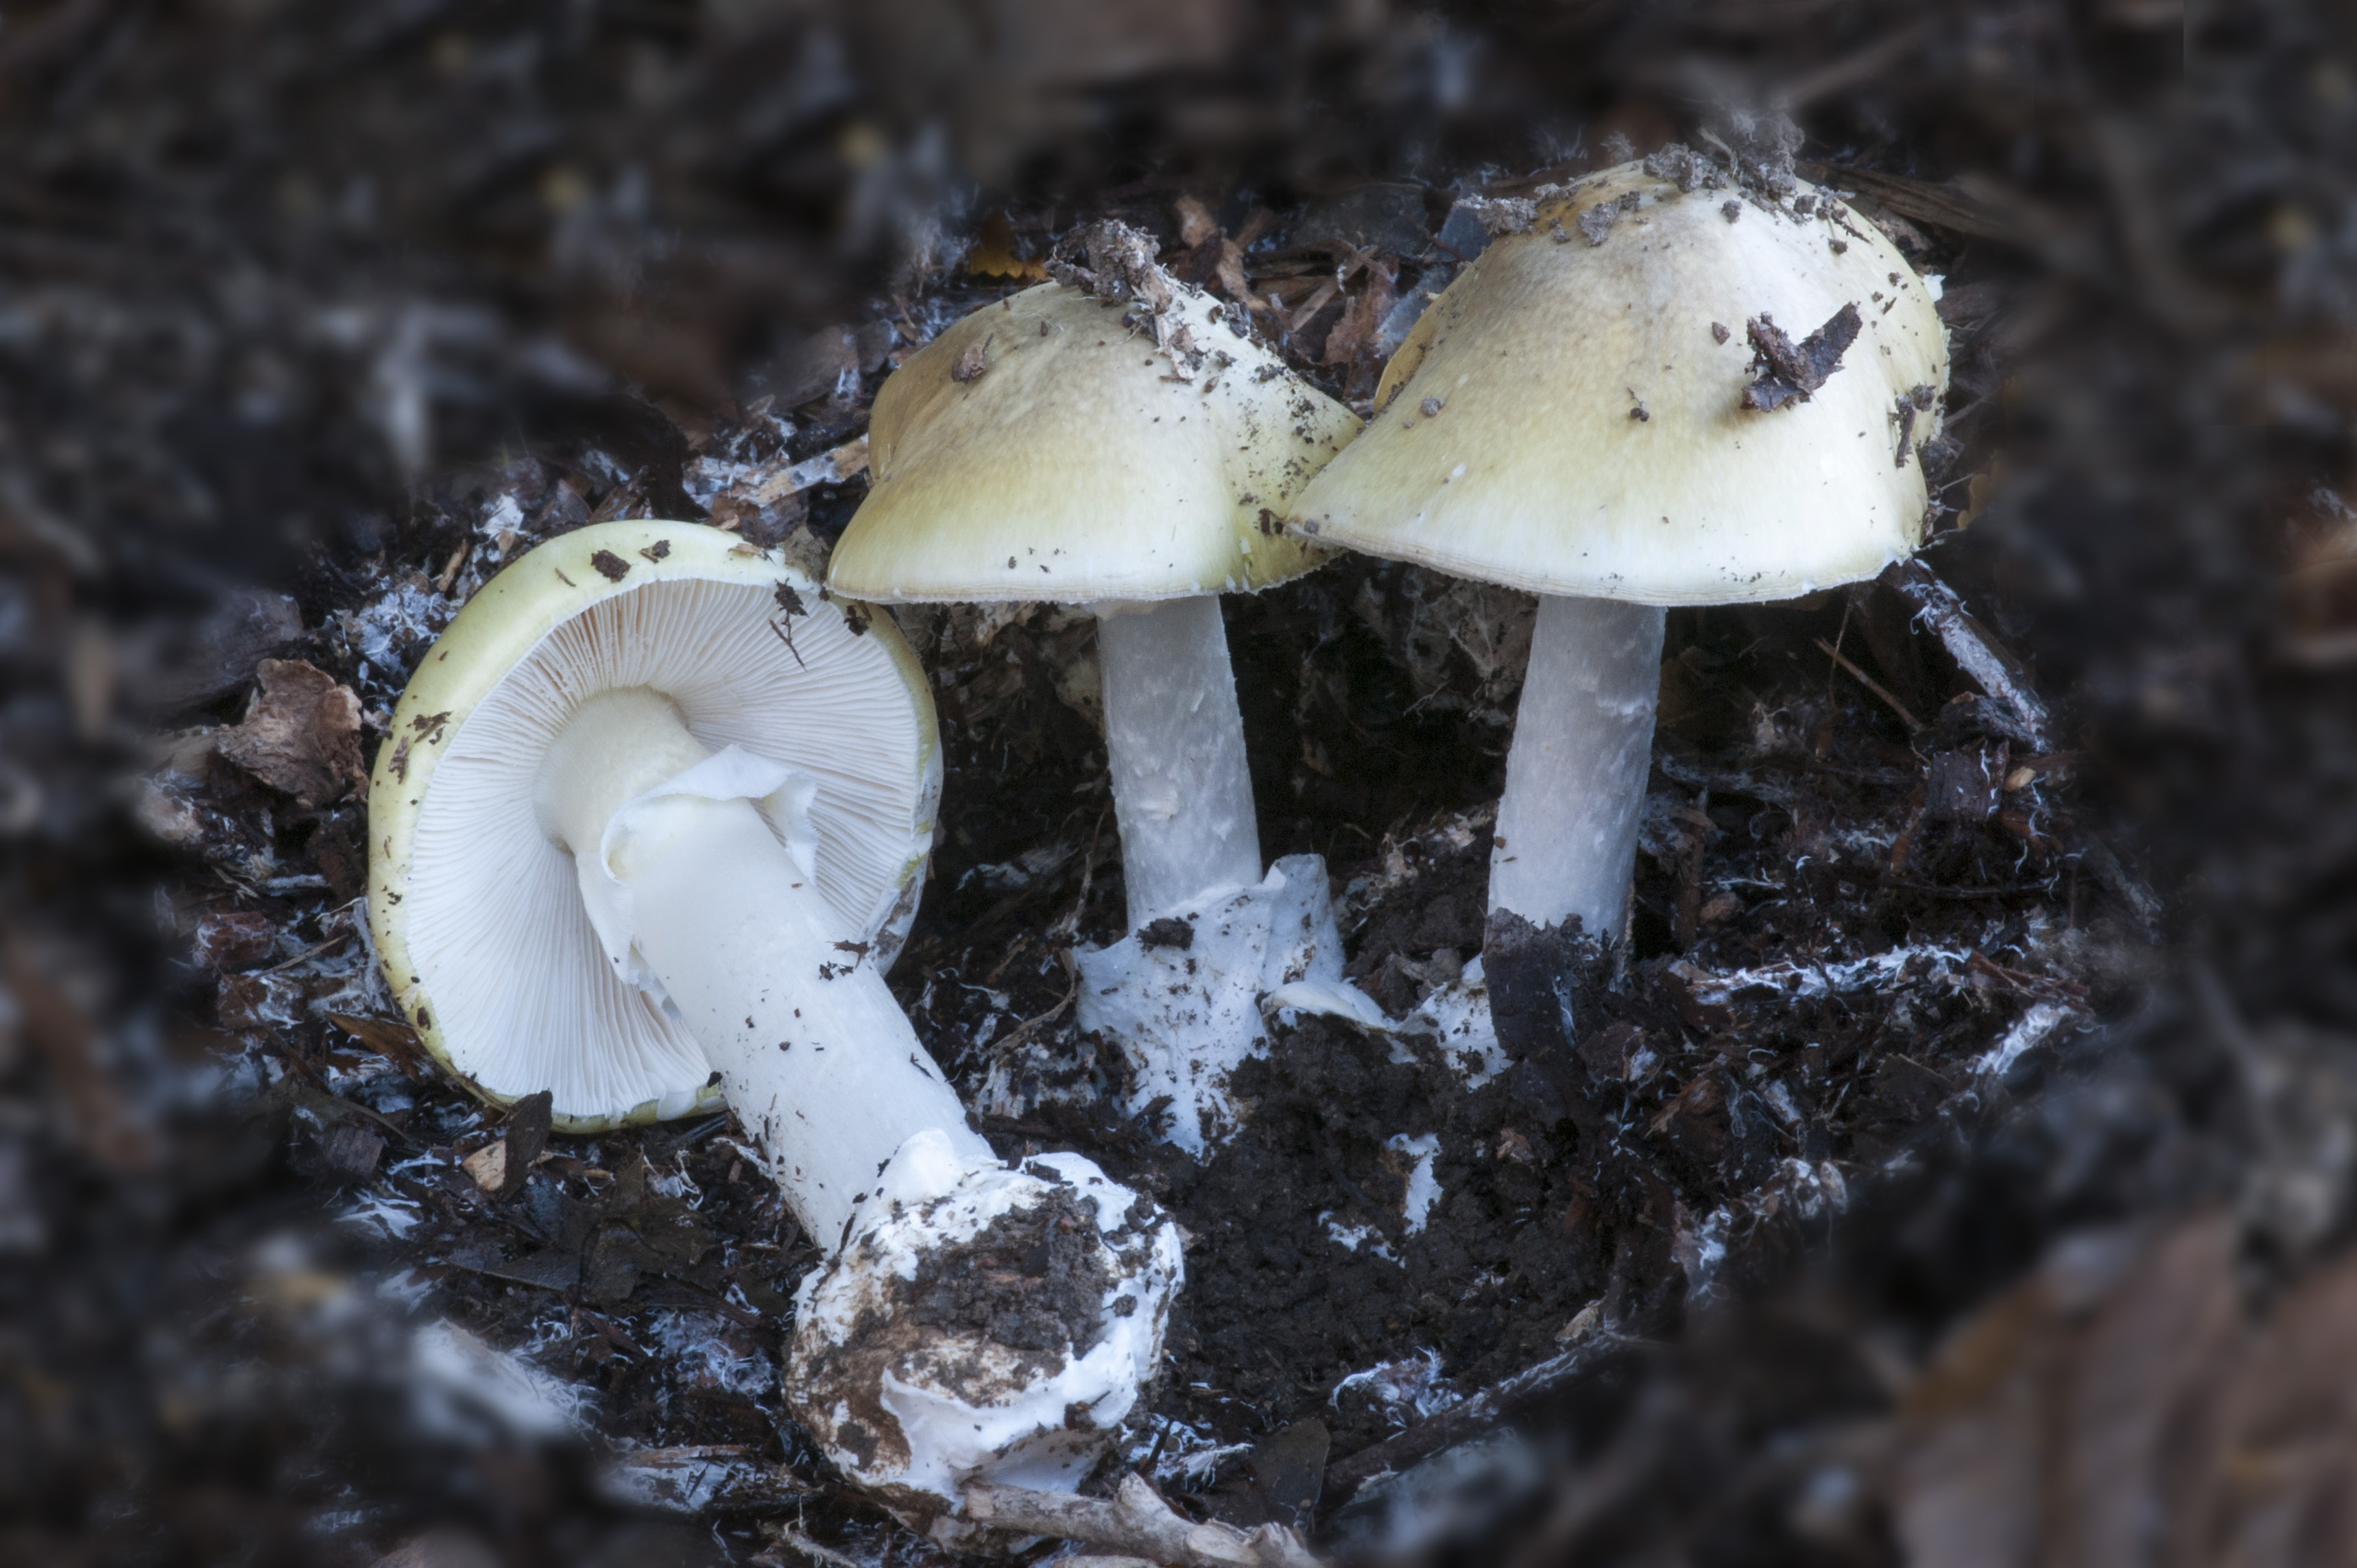 Canberra's fungi mushrooming after sopping wet weather